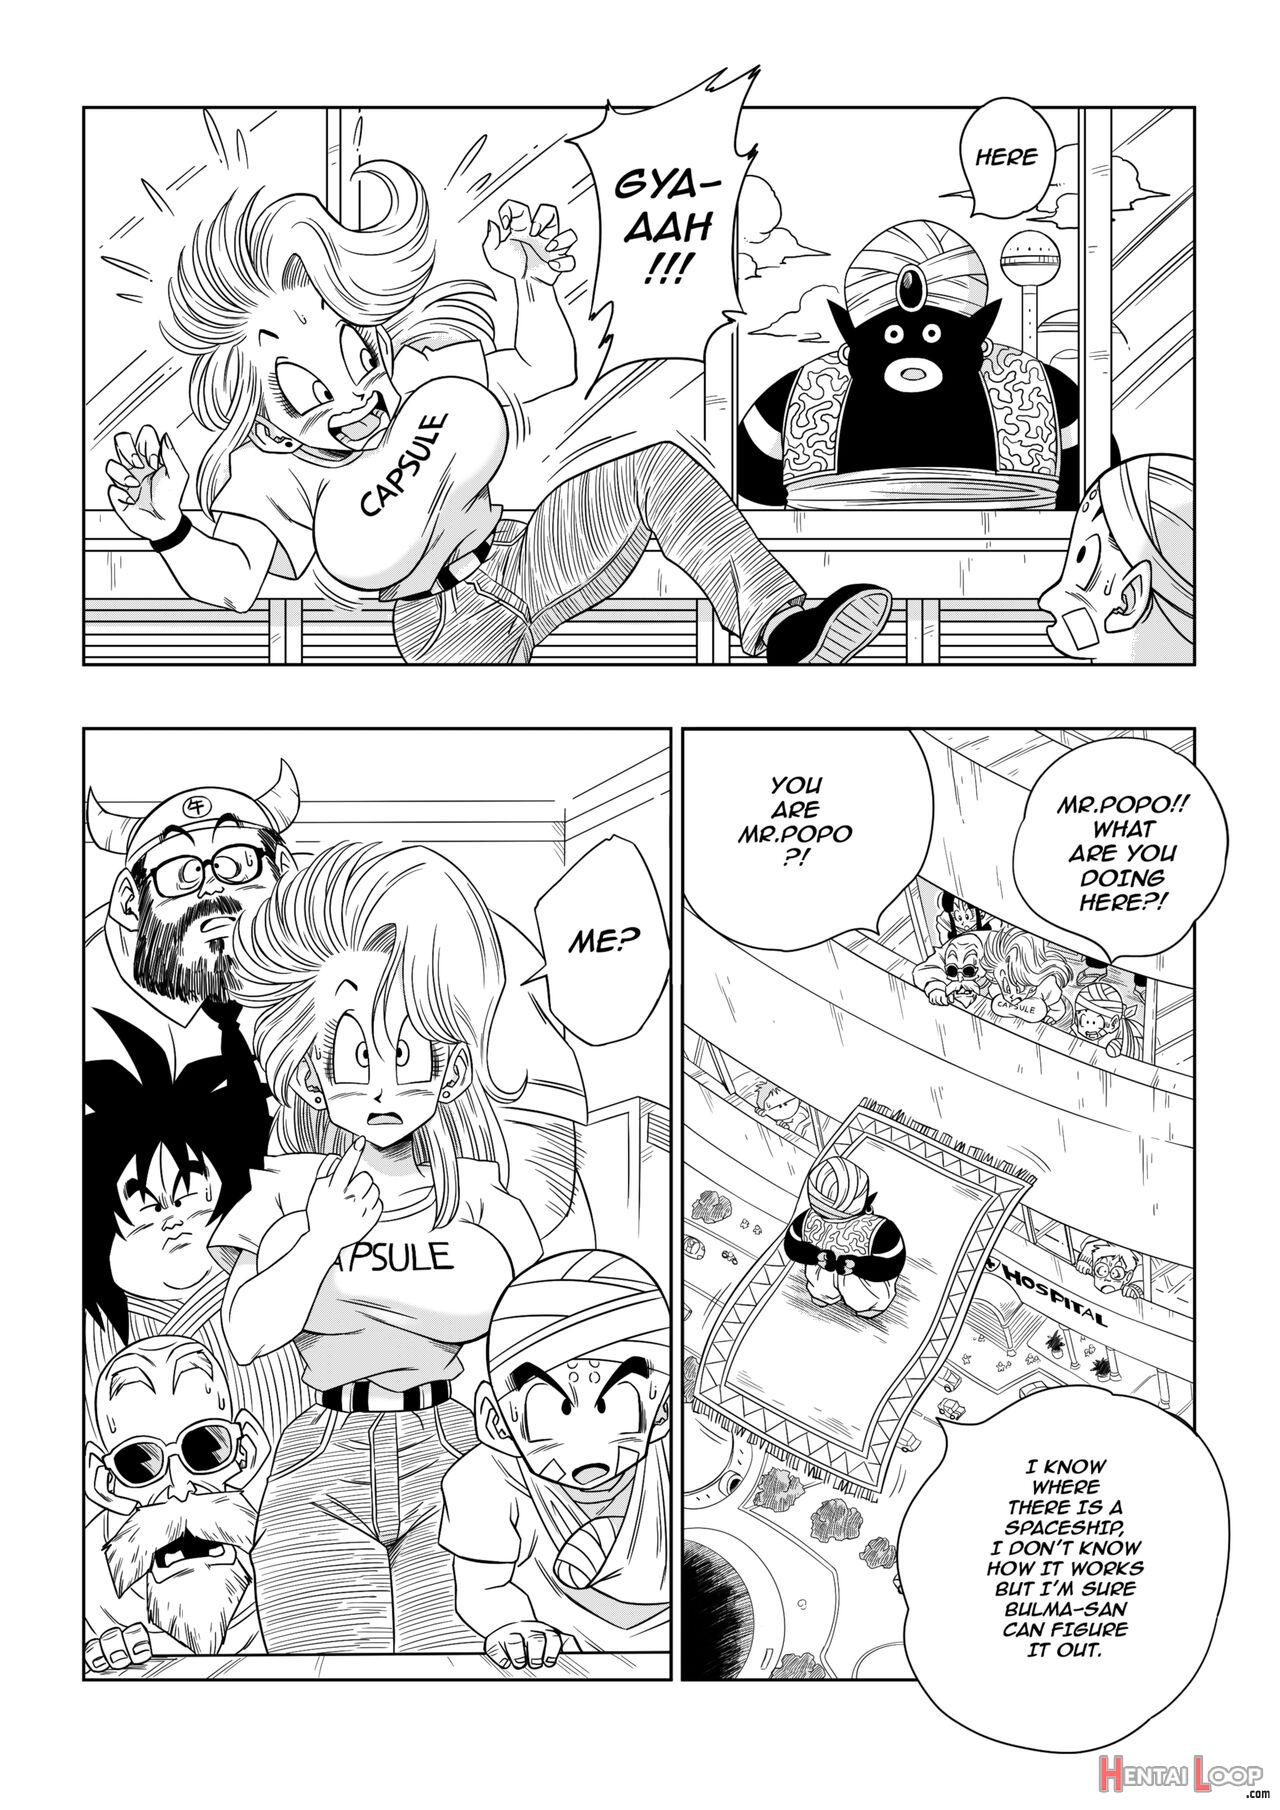 Bulma Meets Mr.popo - Sex Inside The Mysterious Spaceship! page 3